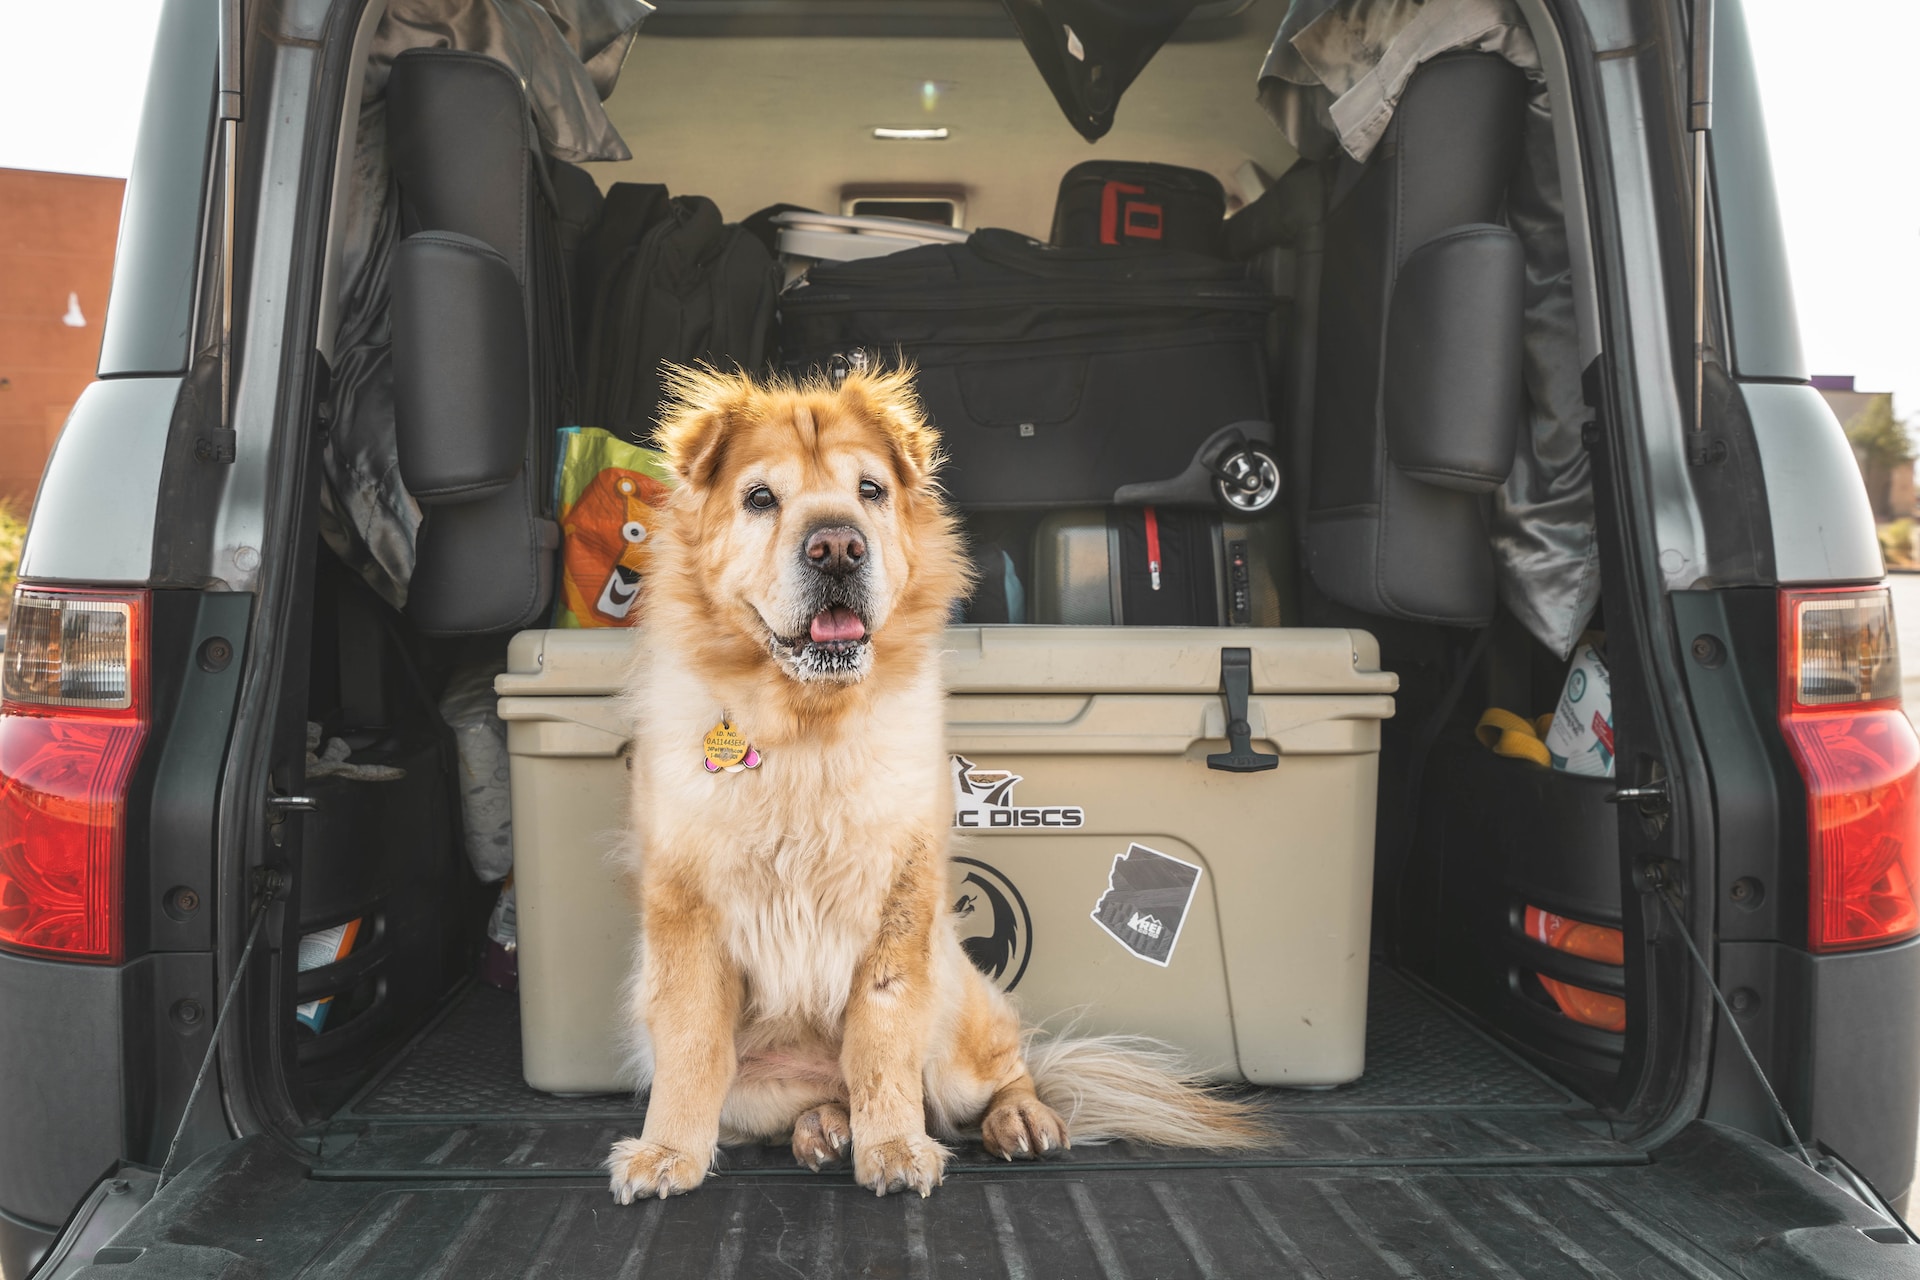 Road Trips with Dogs: 8 Best Tips to Make it a Tail-Wagging Adventure